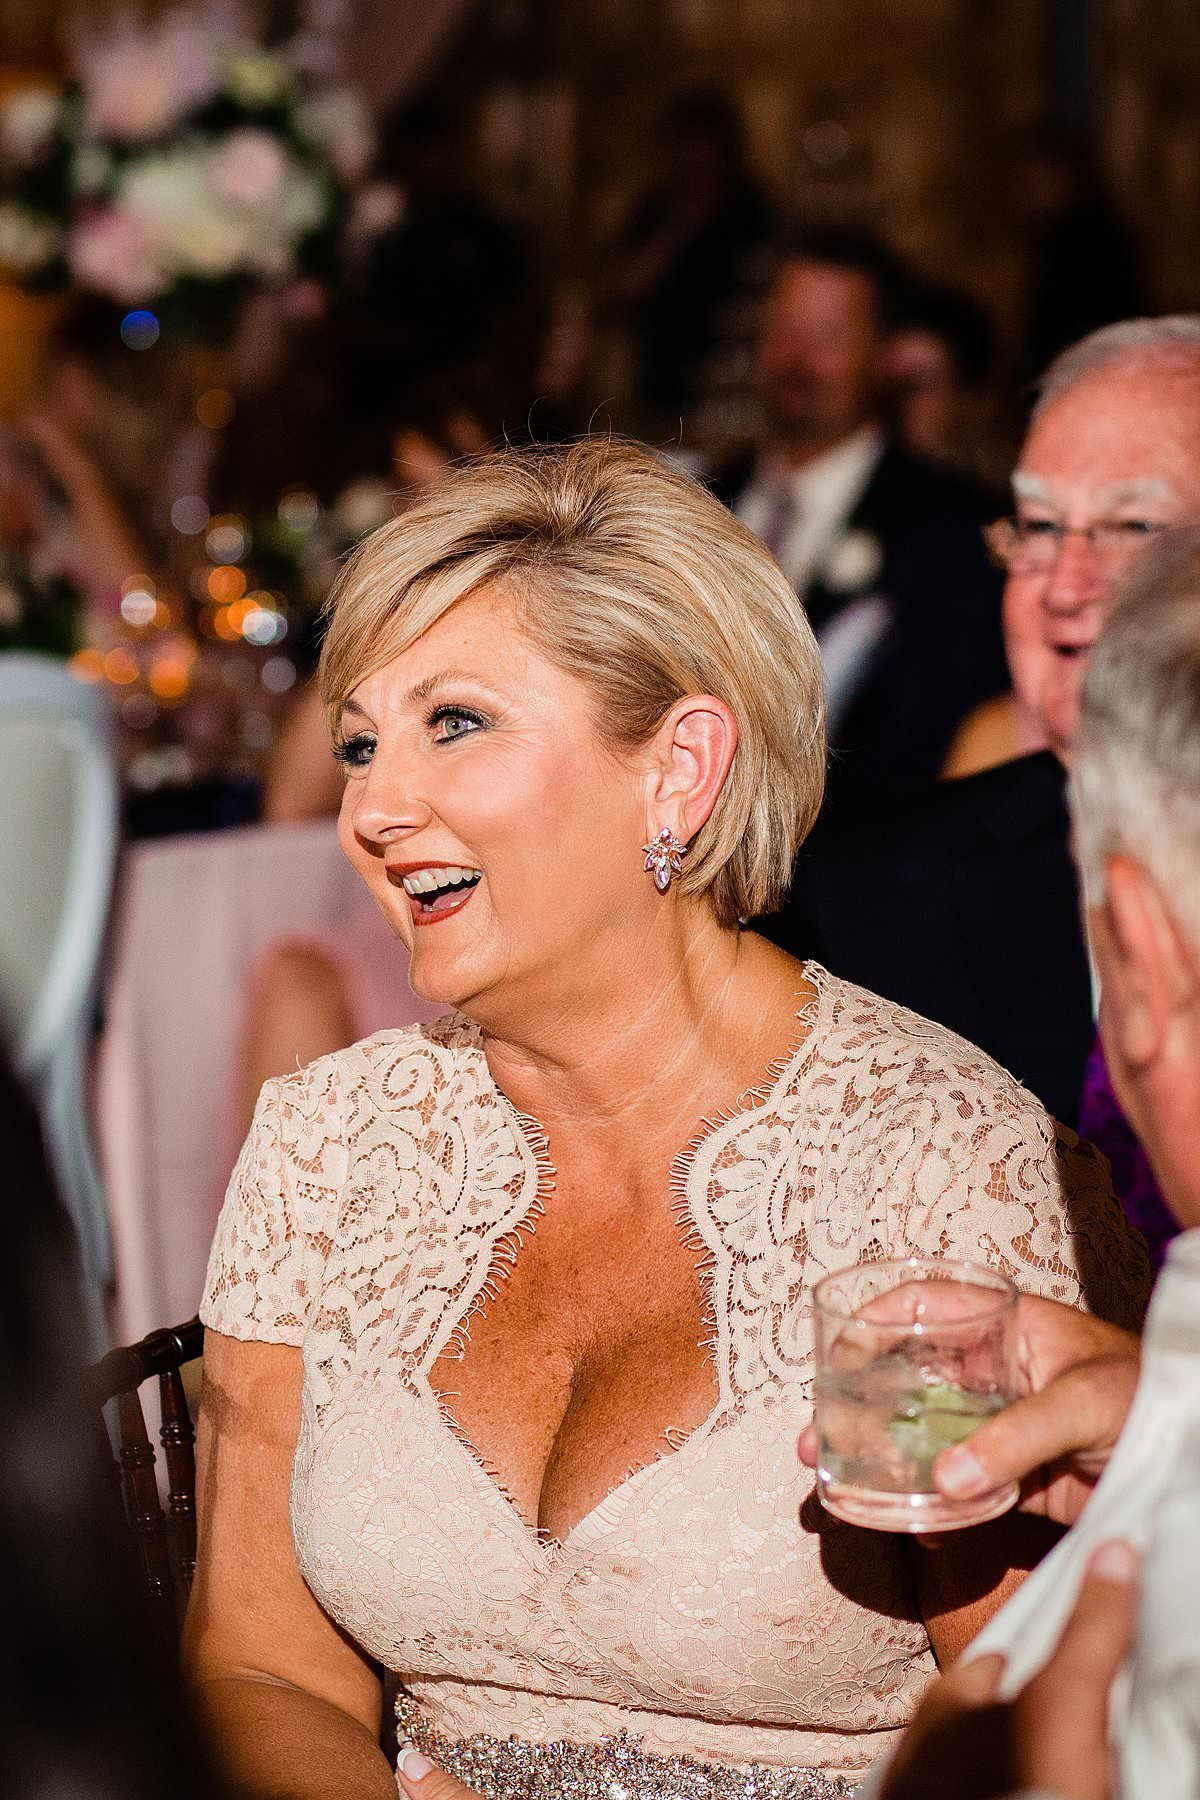 Mother of bride smiling during wedding toasts